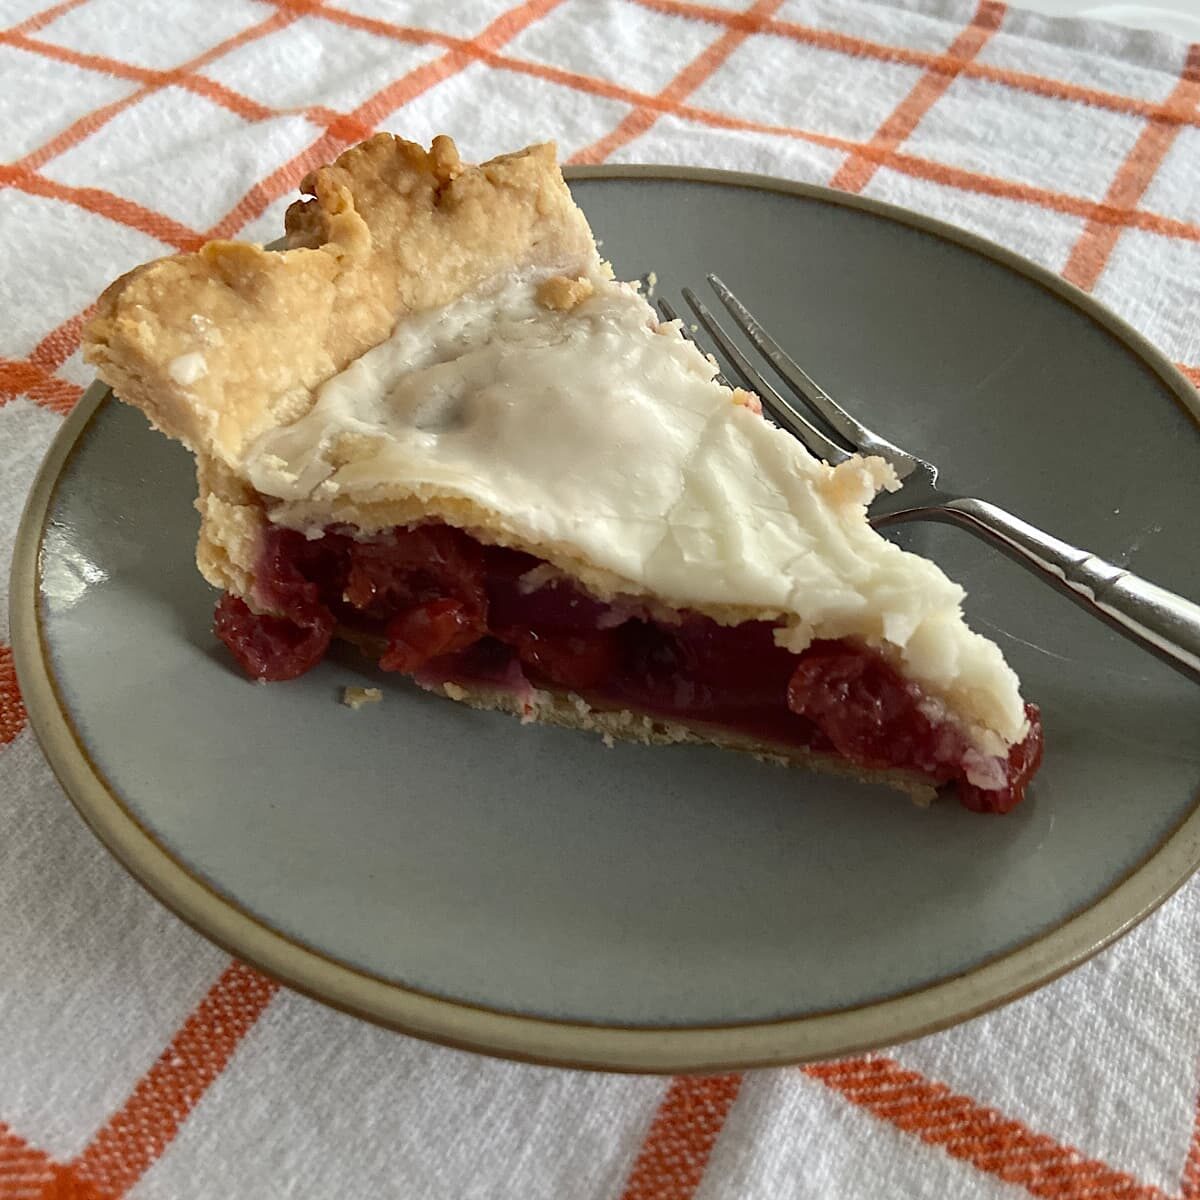 slice of cherry pie on plate with a powdered sugar icing.